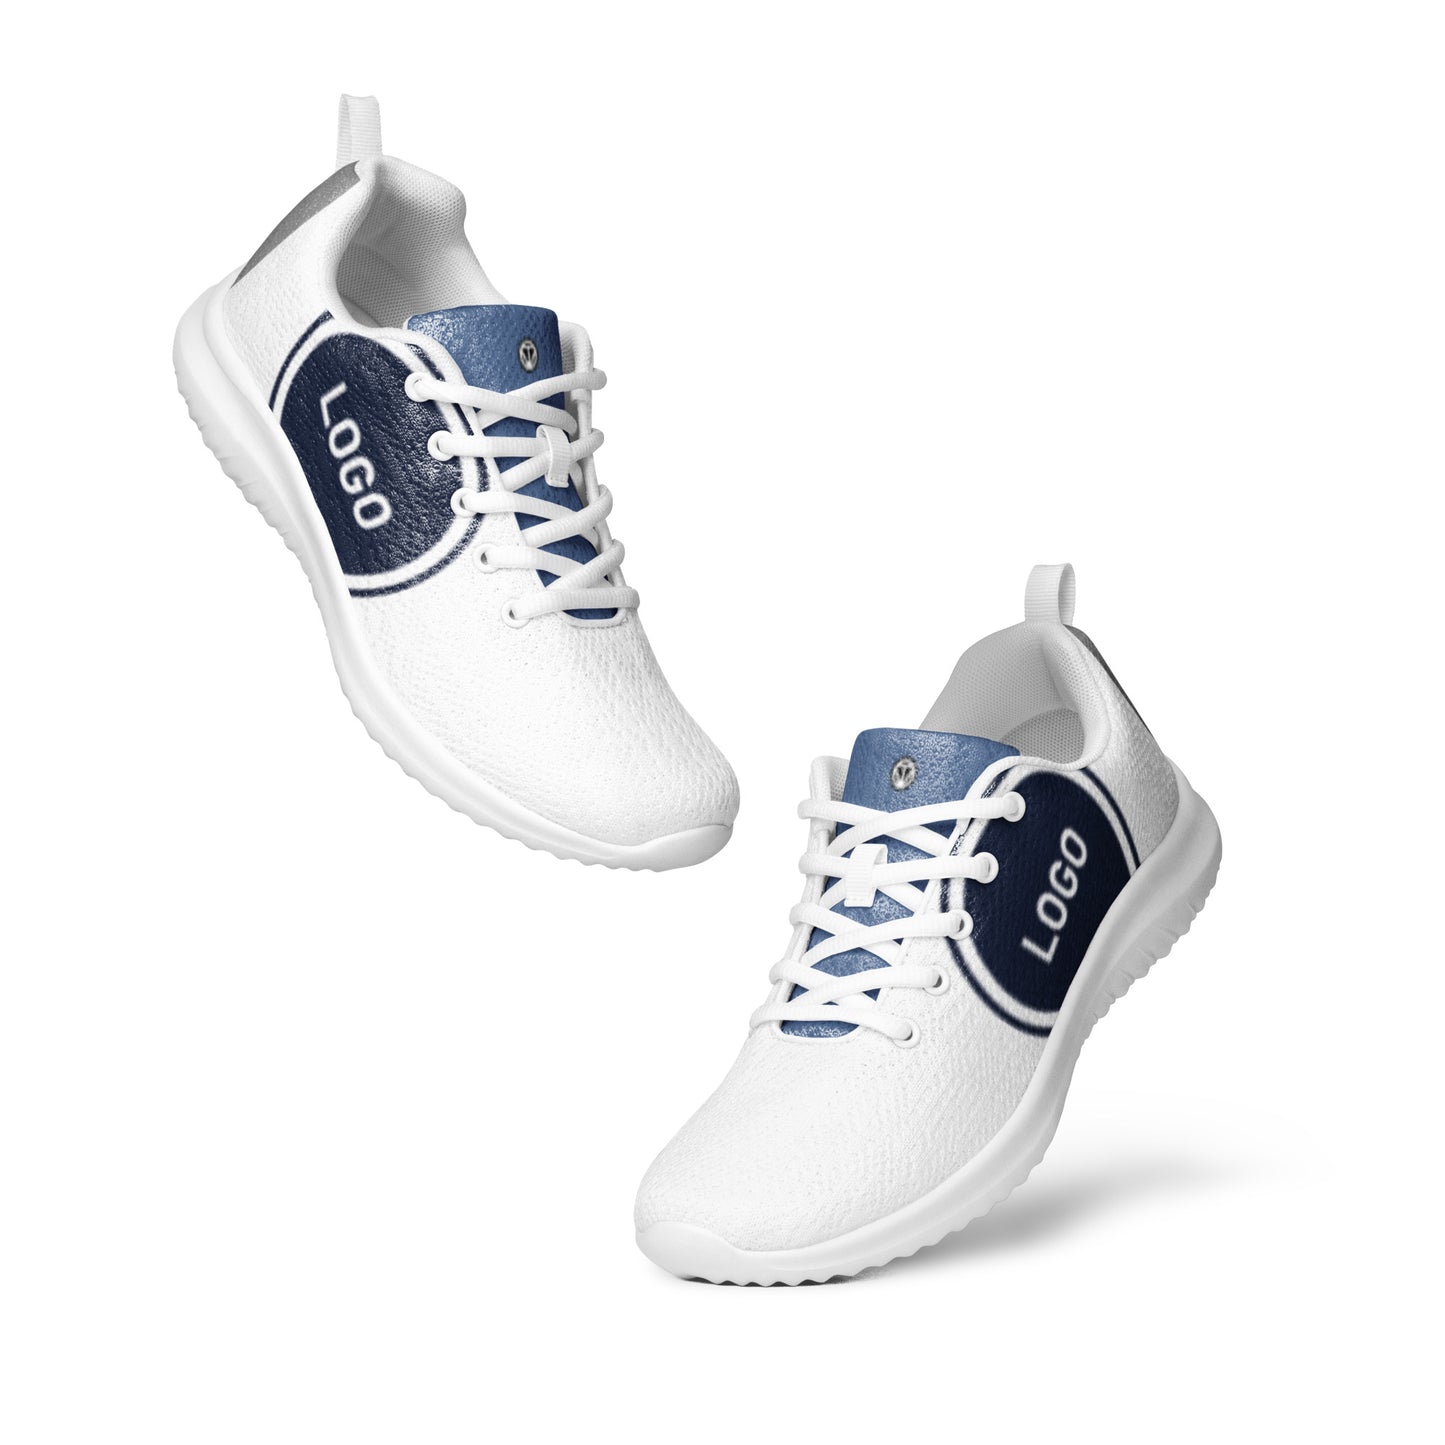 TIME OF VIBES - Women’s athletic shoes CORPORATE - €89.00